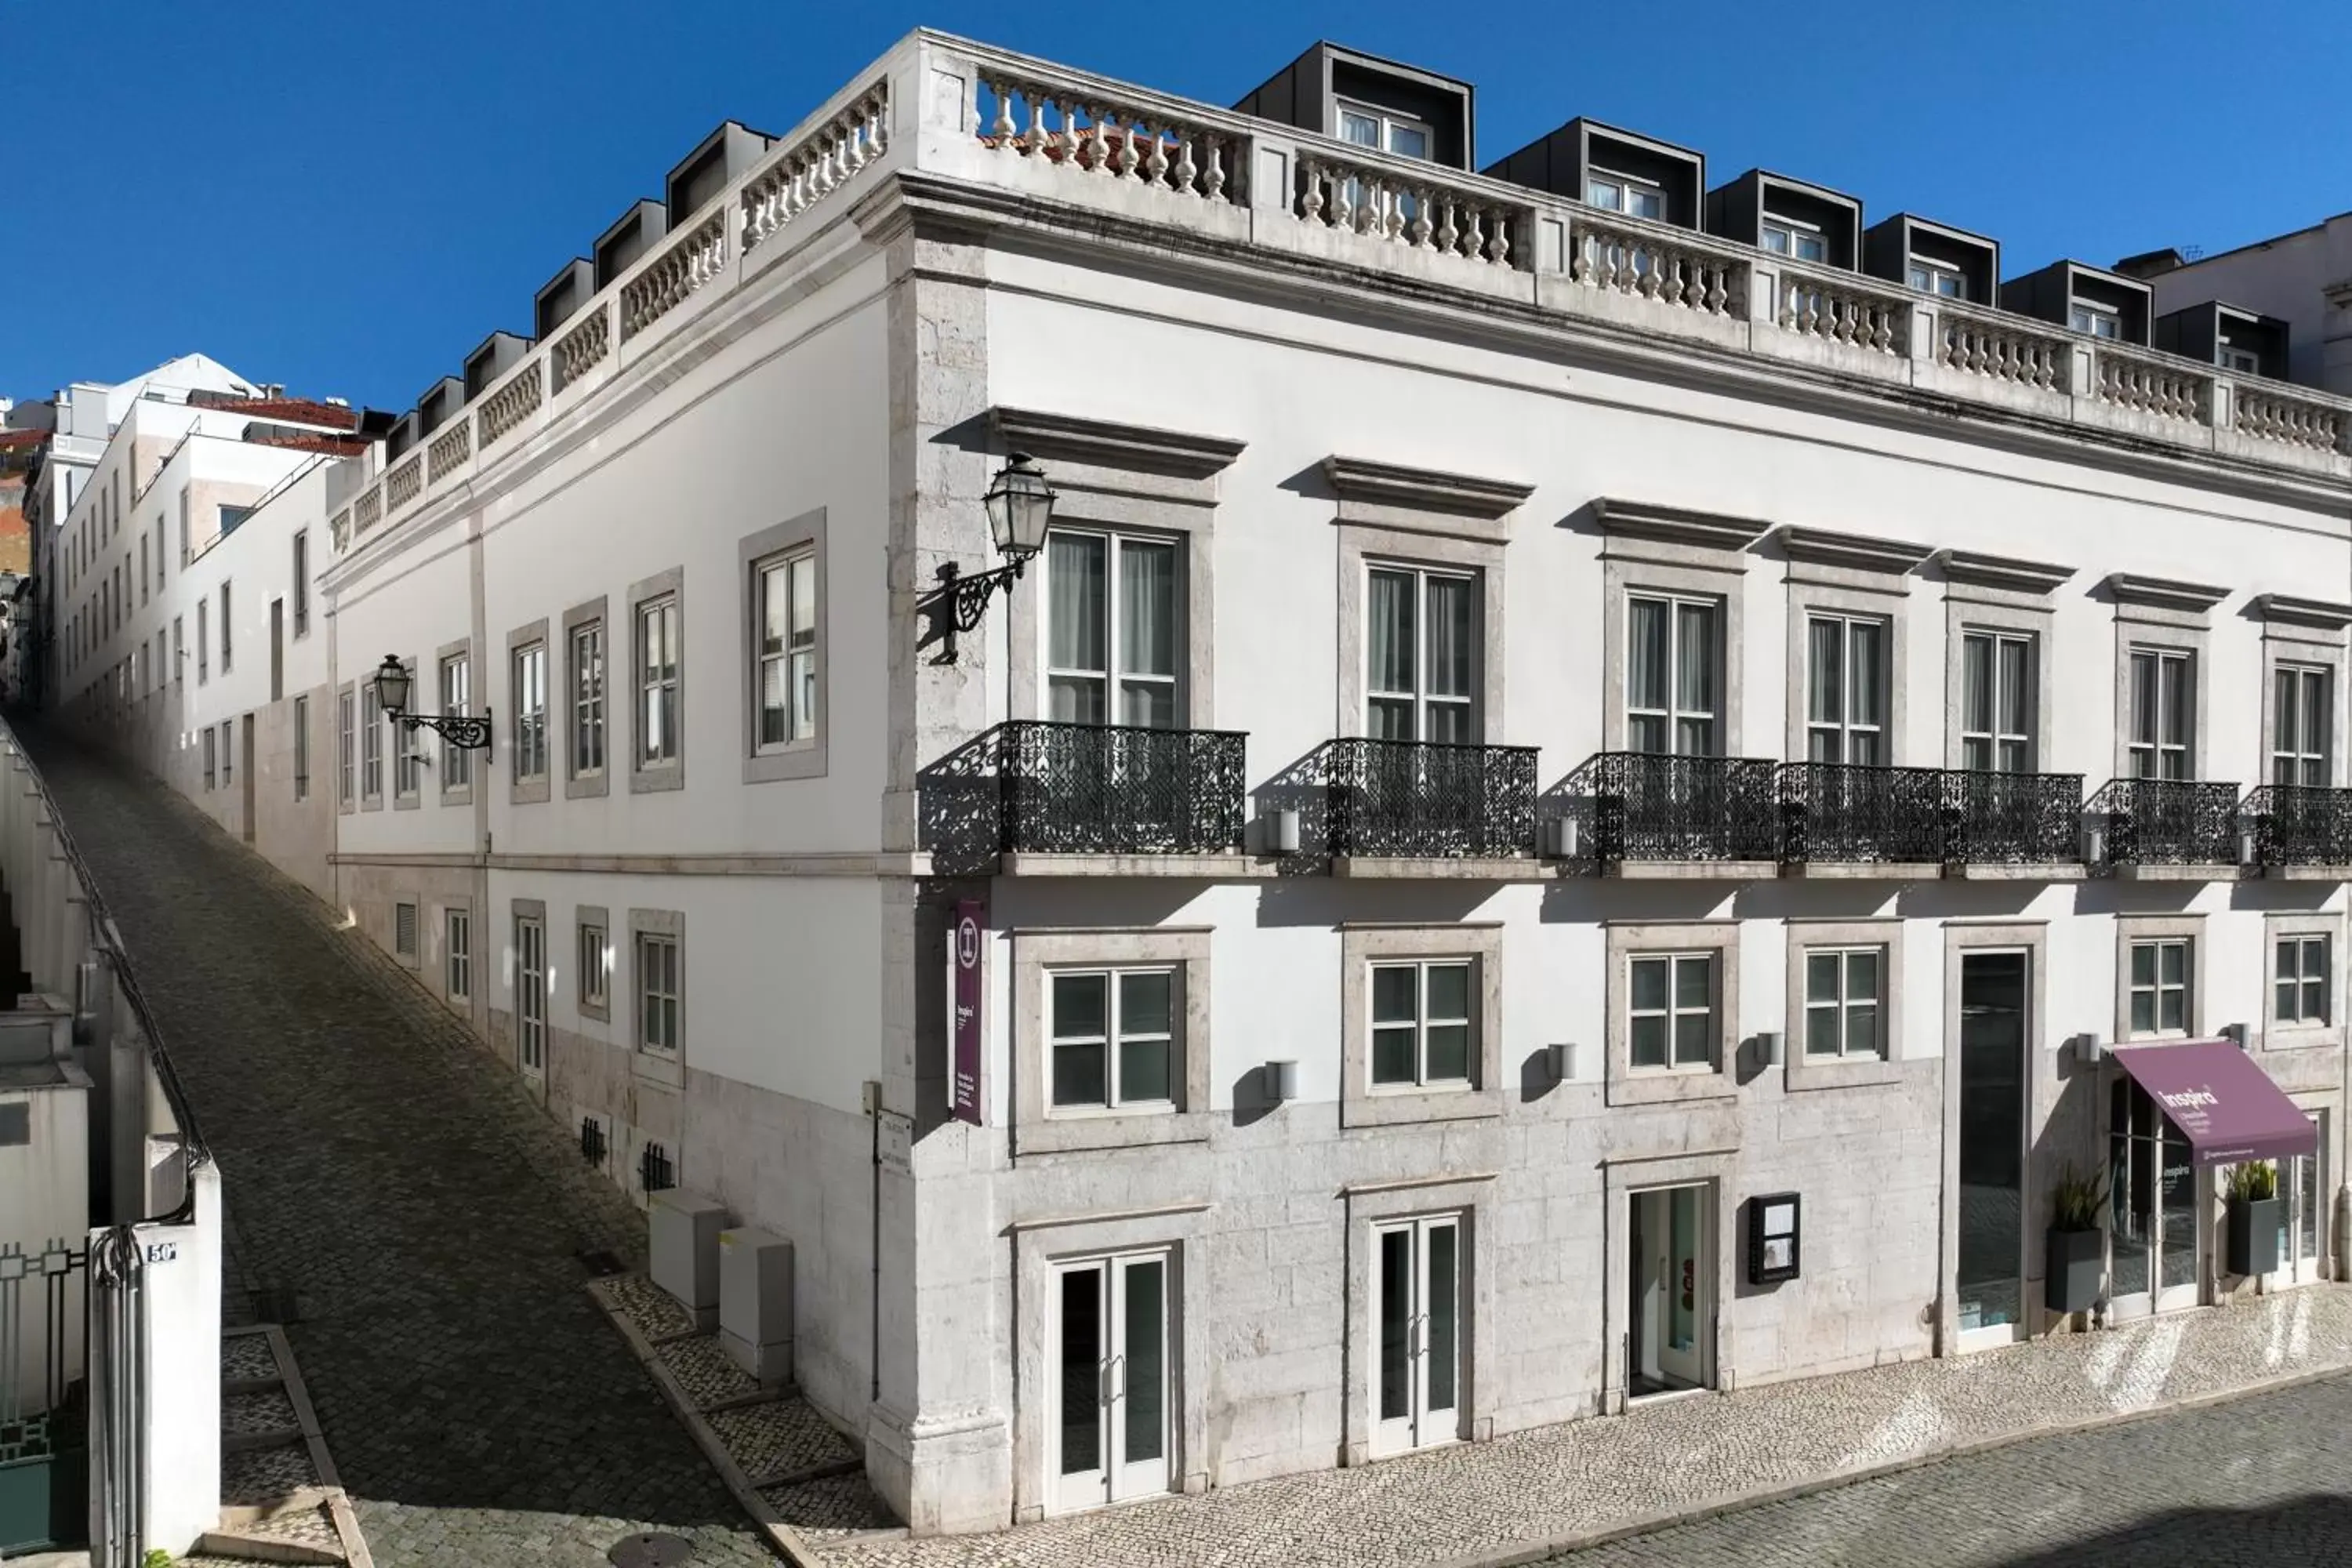 Property Building in Inspira Liberdade Boutique Hotel